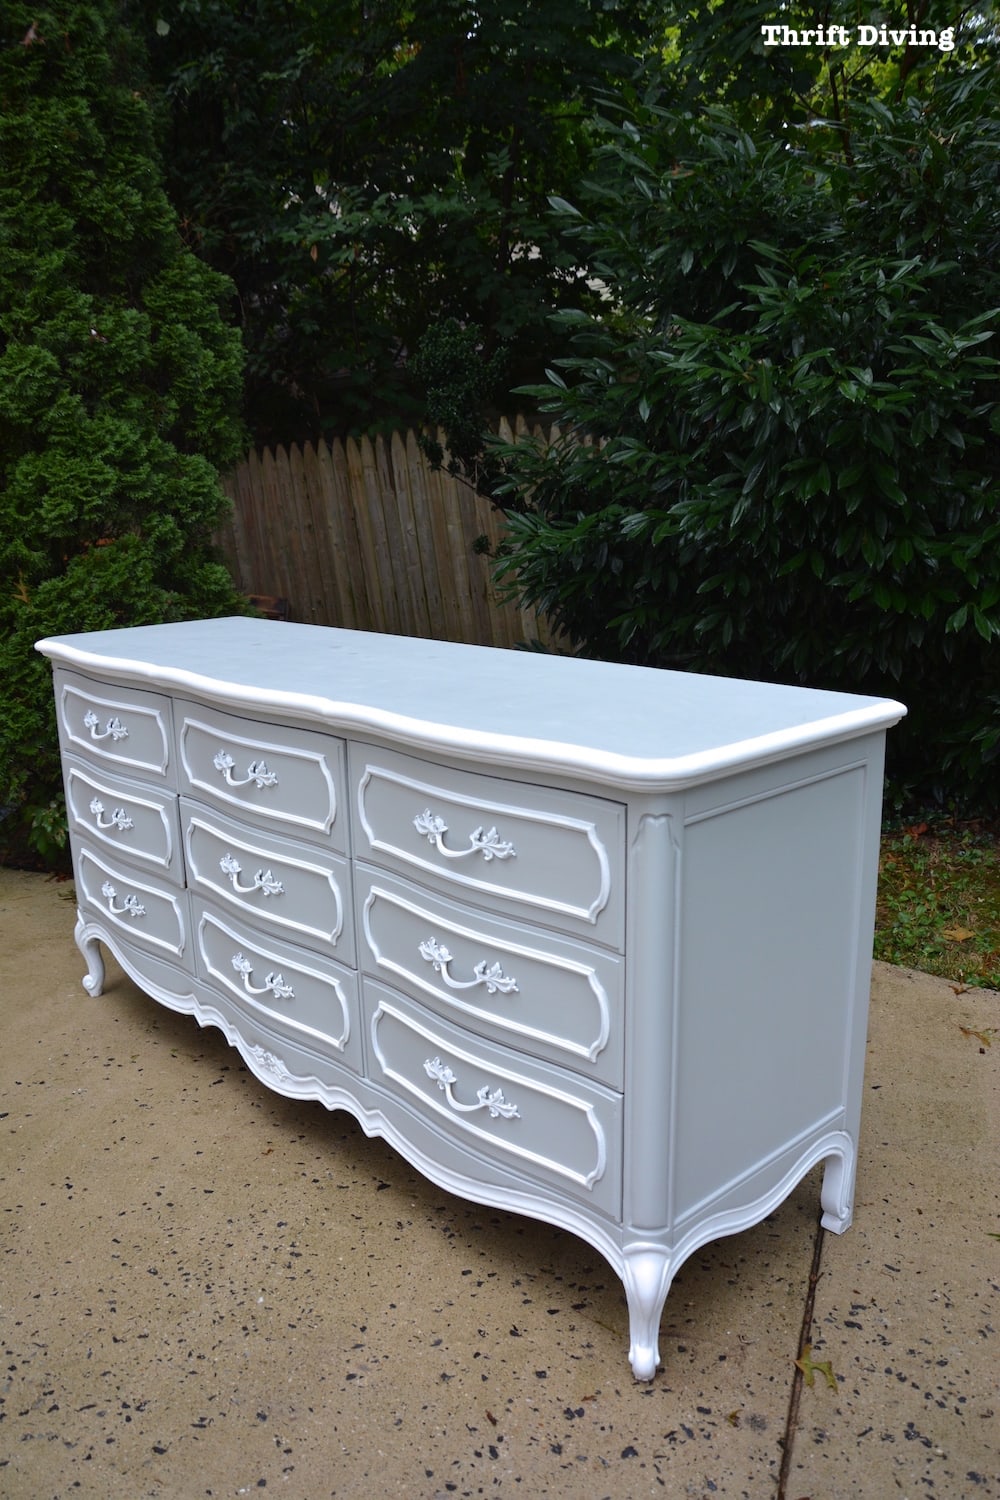 French Provincial Dresser from the thrift store - Gray and white AFTER - Thrift Diving